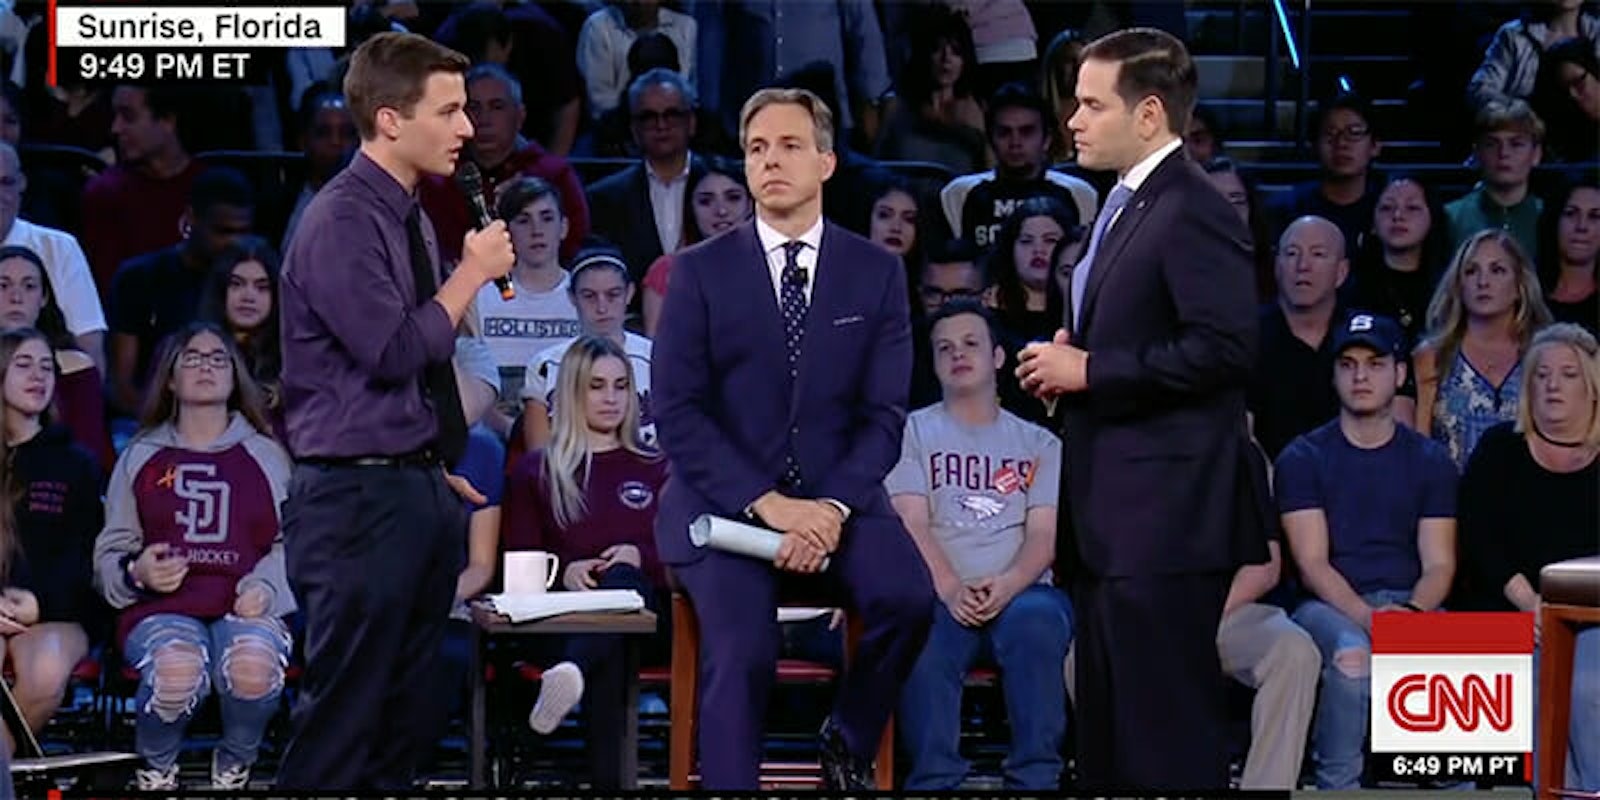 CNN denied giving a 'scripted' question to a Florida shooting survivor for its gun control town hall.